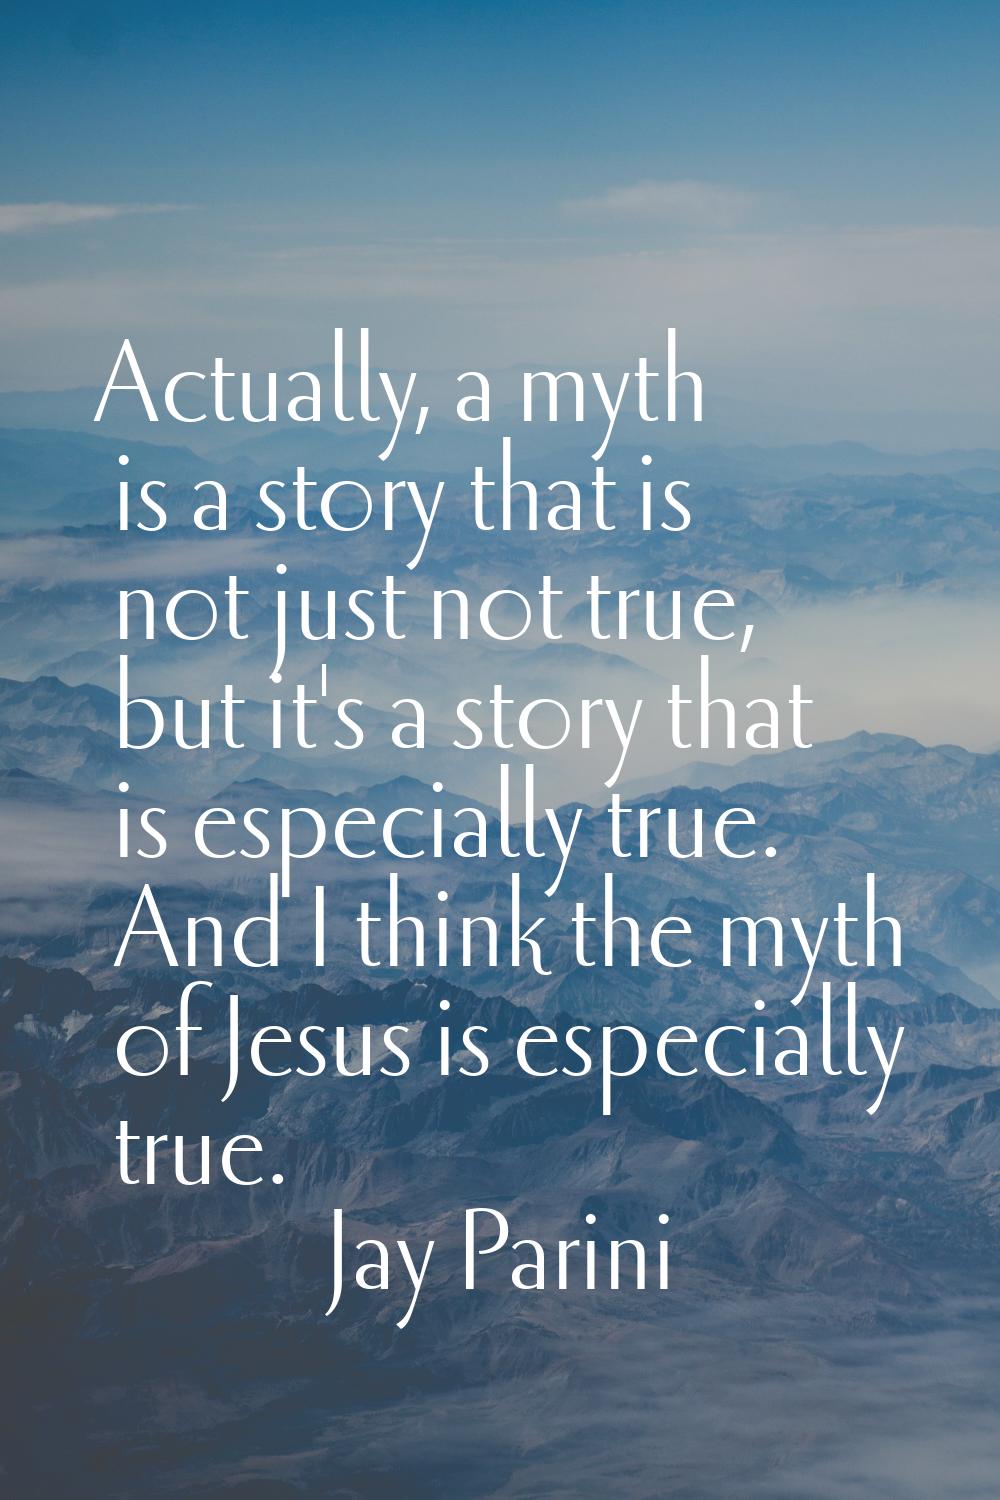 Actually, a myth is a story that is not just not true, but it's a story that is especially true. An